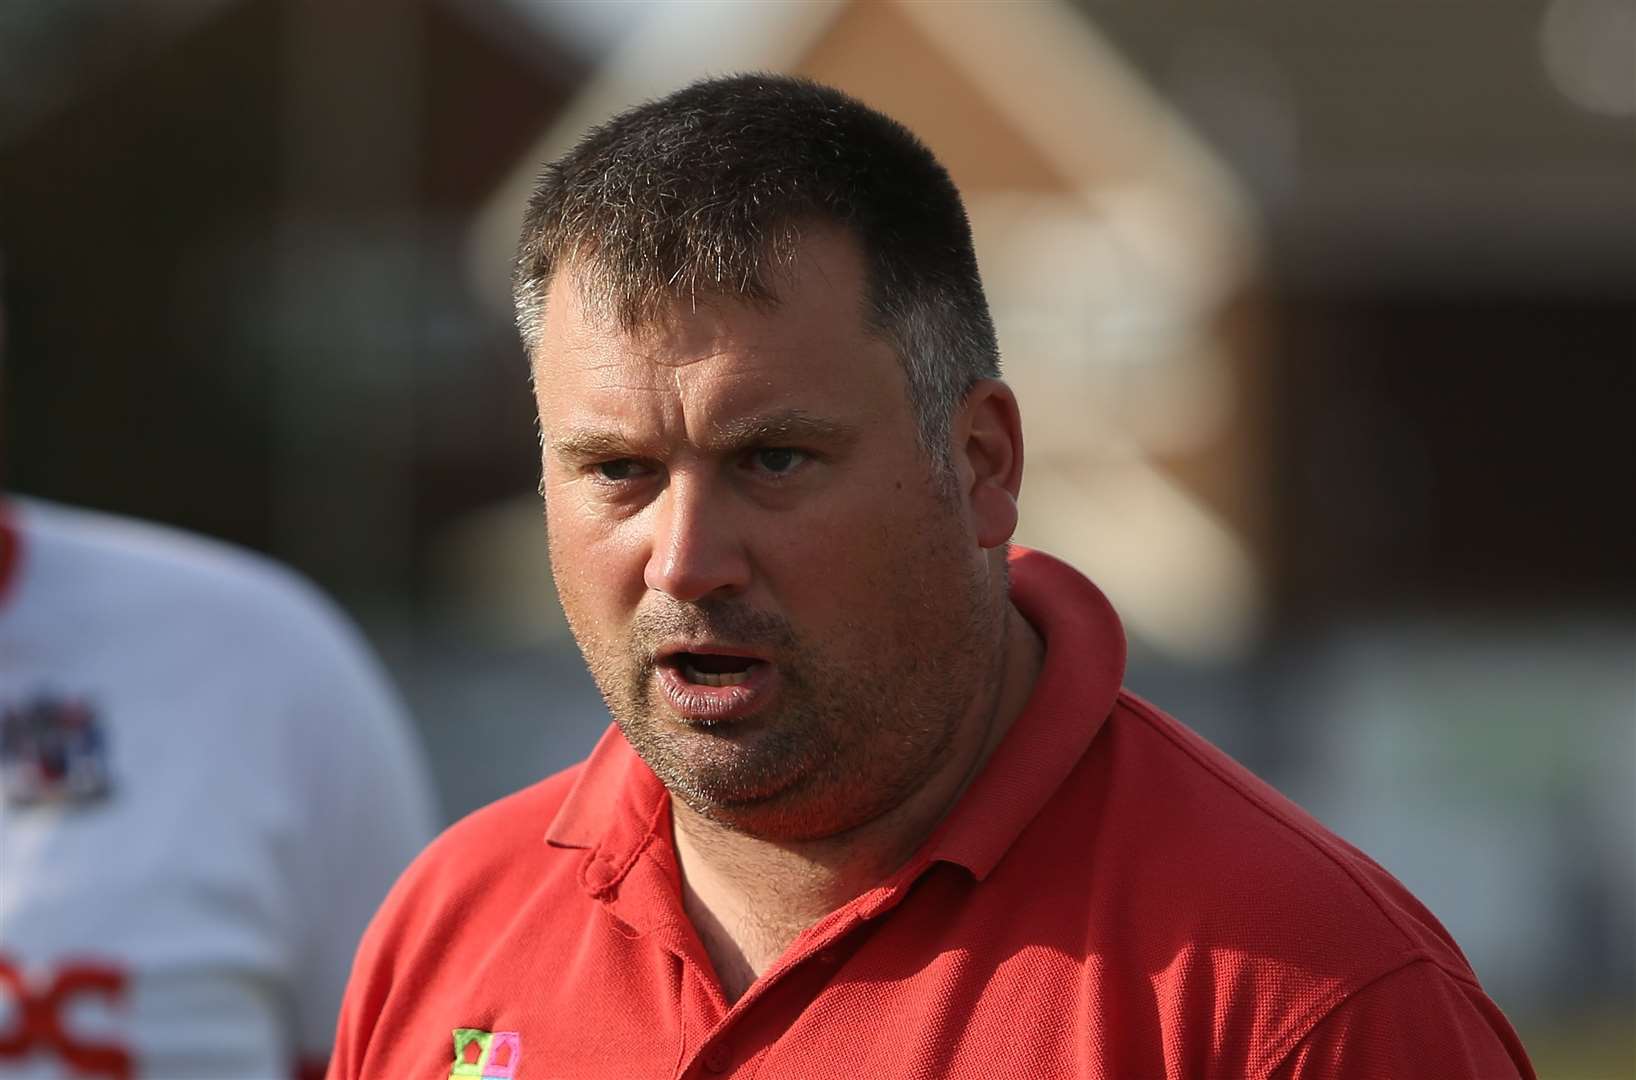 Deal Town manager Steve King. Picture: Paul Willmott